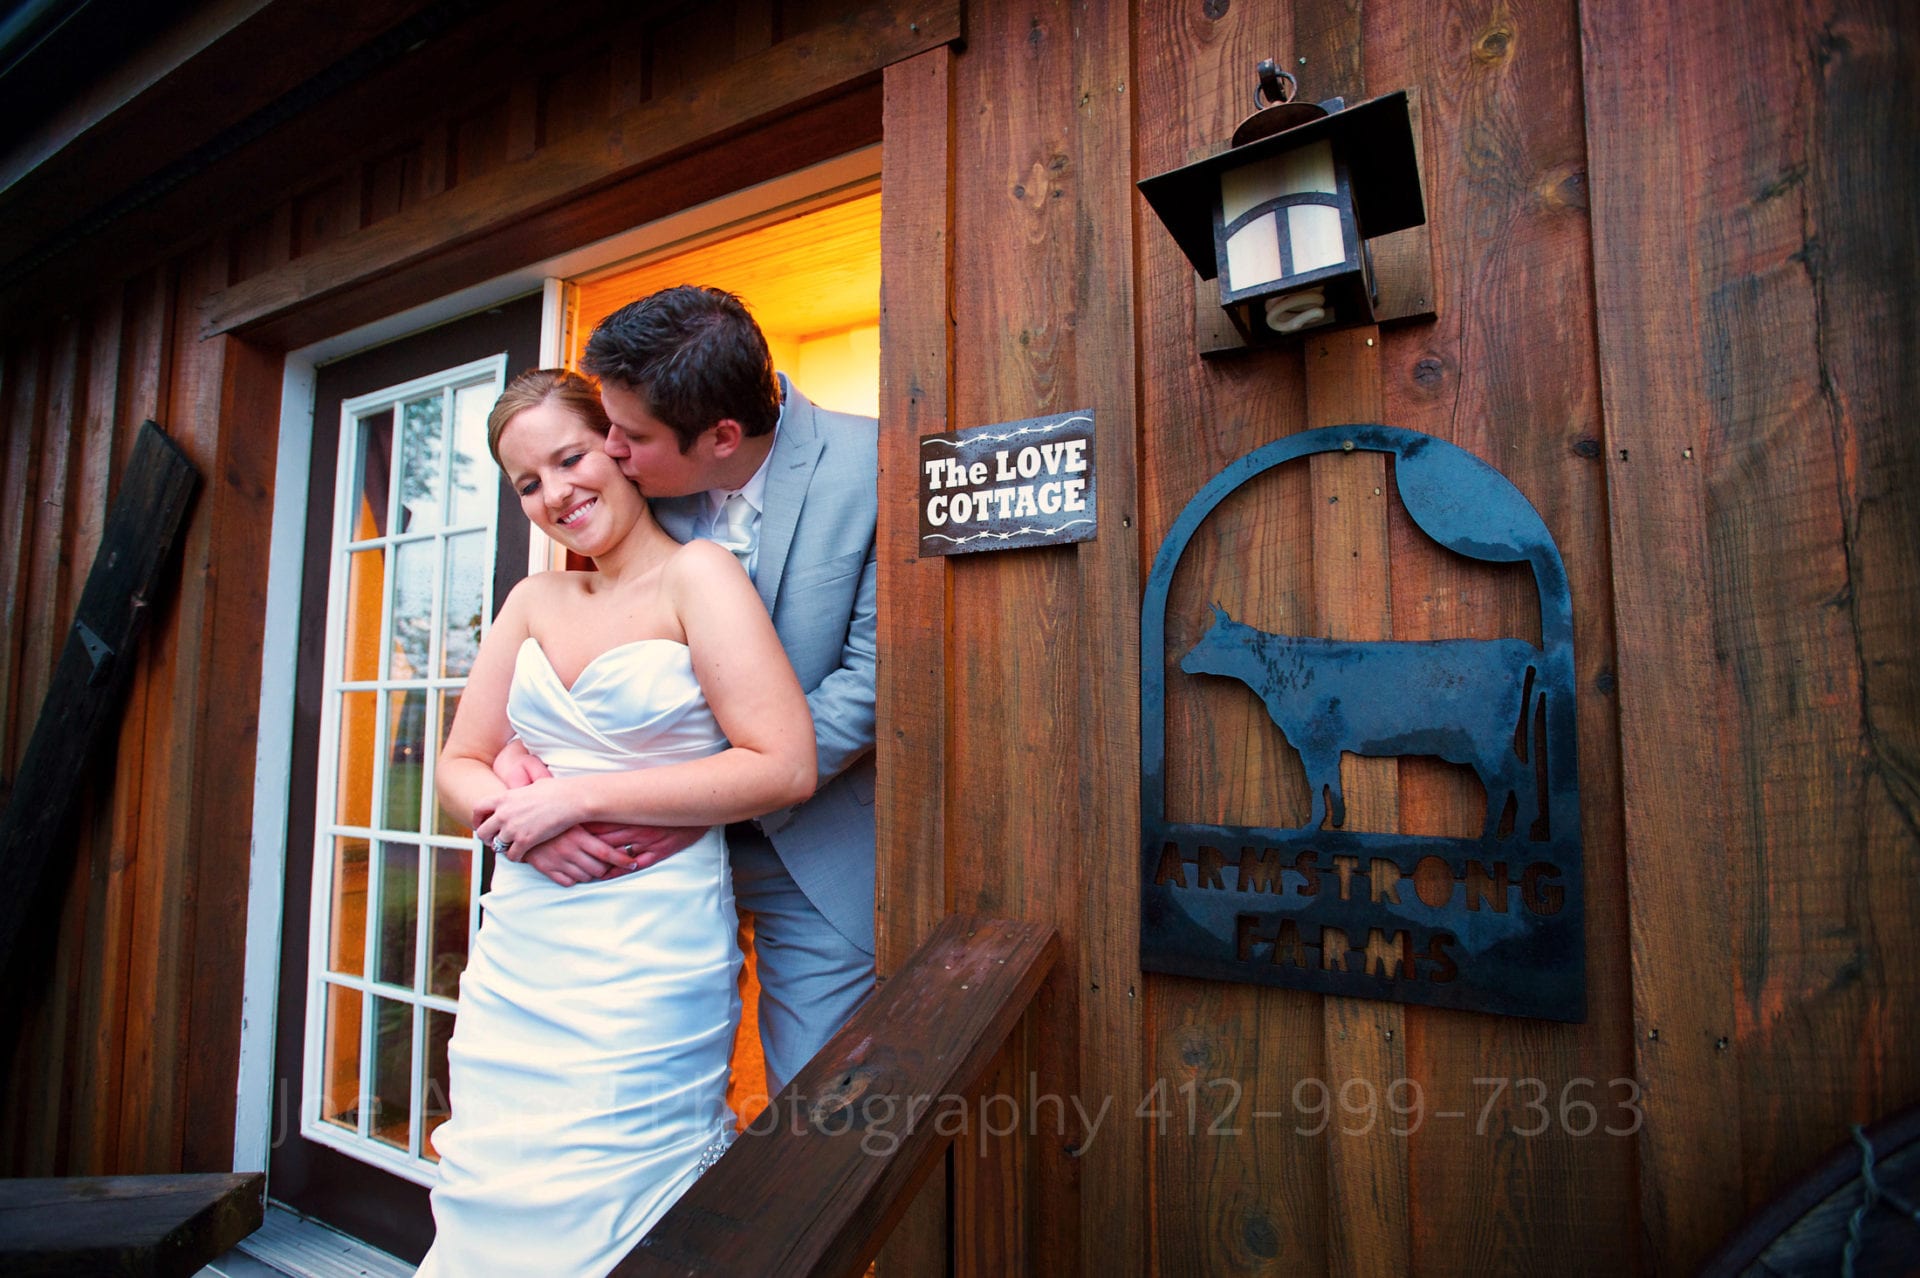 A bride smiles as her groom embraces her from behind and kisses her on the cheek in the doorway of a house called "The Love Cottage" Armstrong Farms Weddings